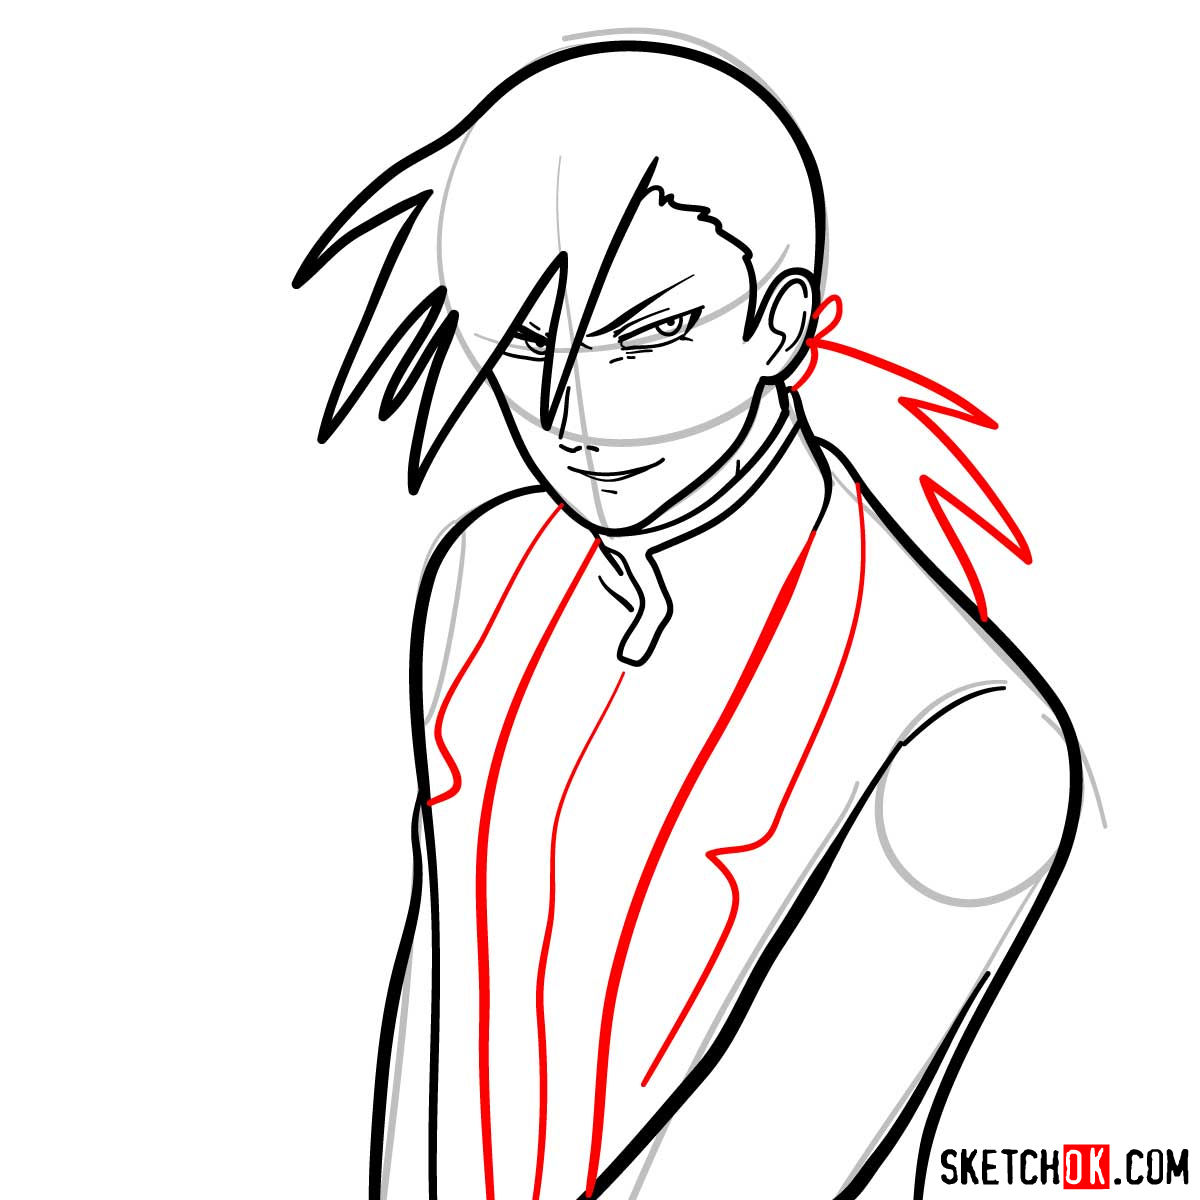 How to draw Greed from Fullmetal Alchemist anime - step 10